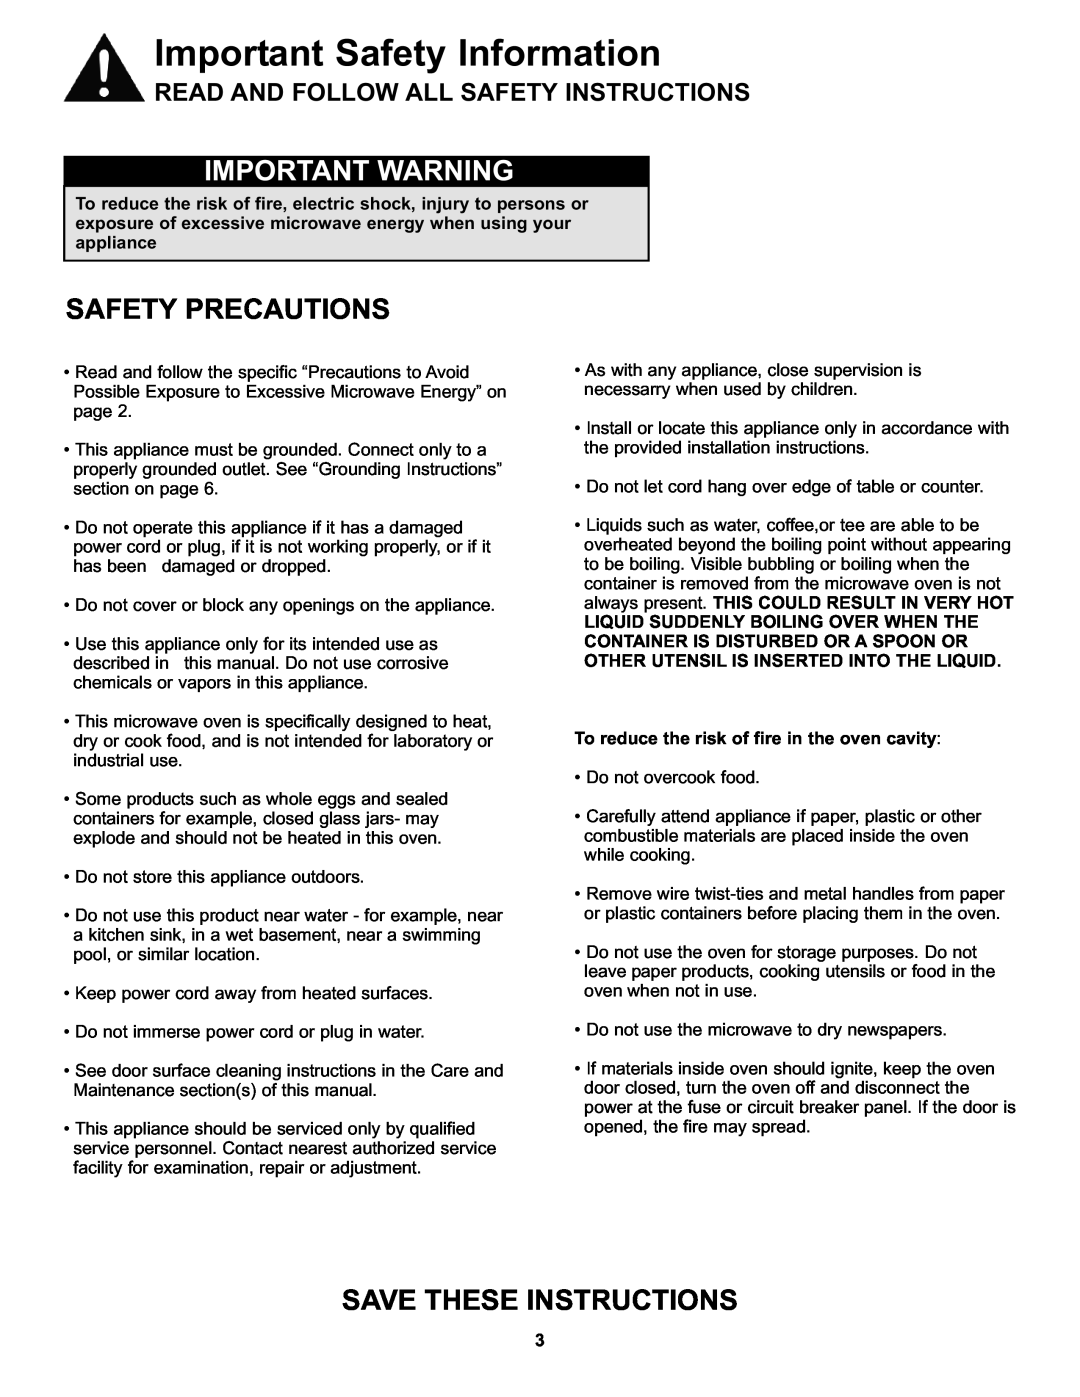 Danby DMW7700BLDB, DMW7700WDB Important Warning, Safety Precautions, Important Safety Information, Save These Instructions 